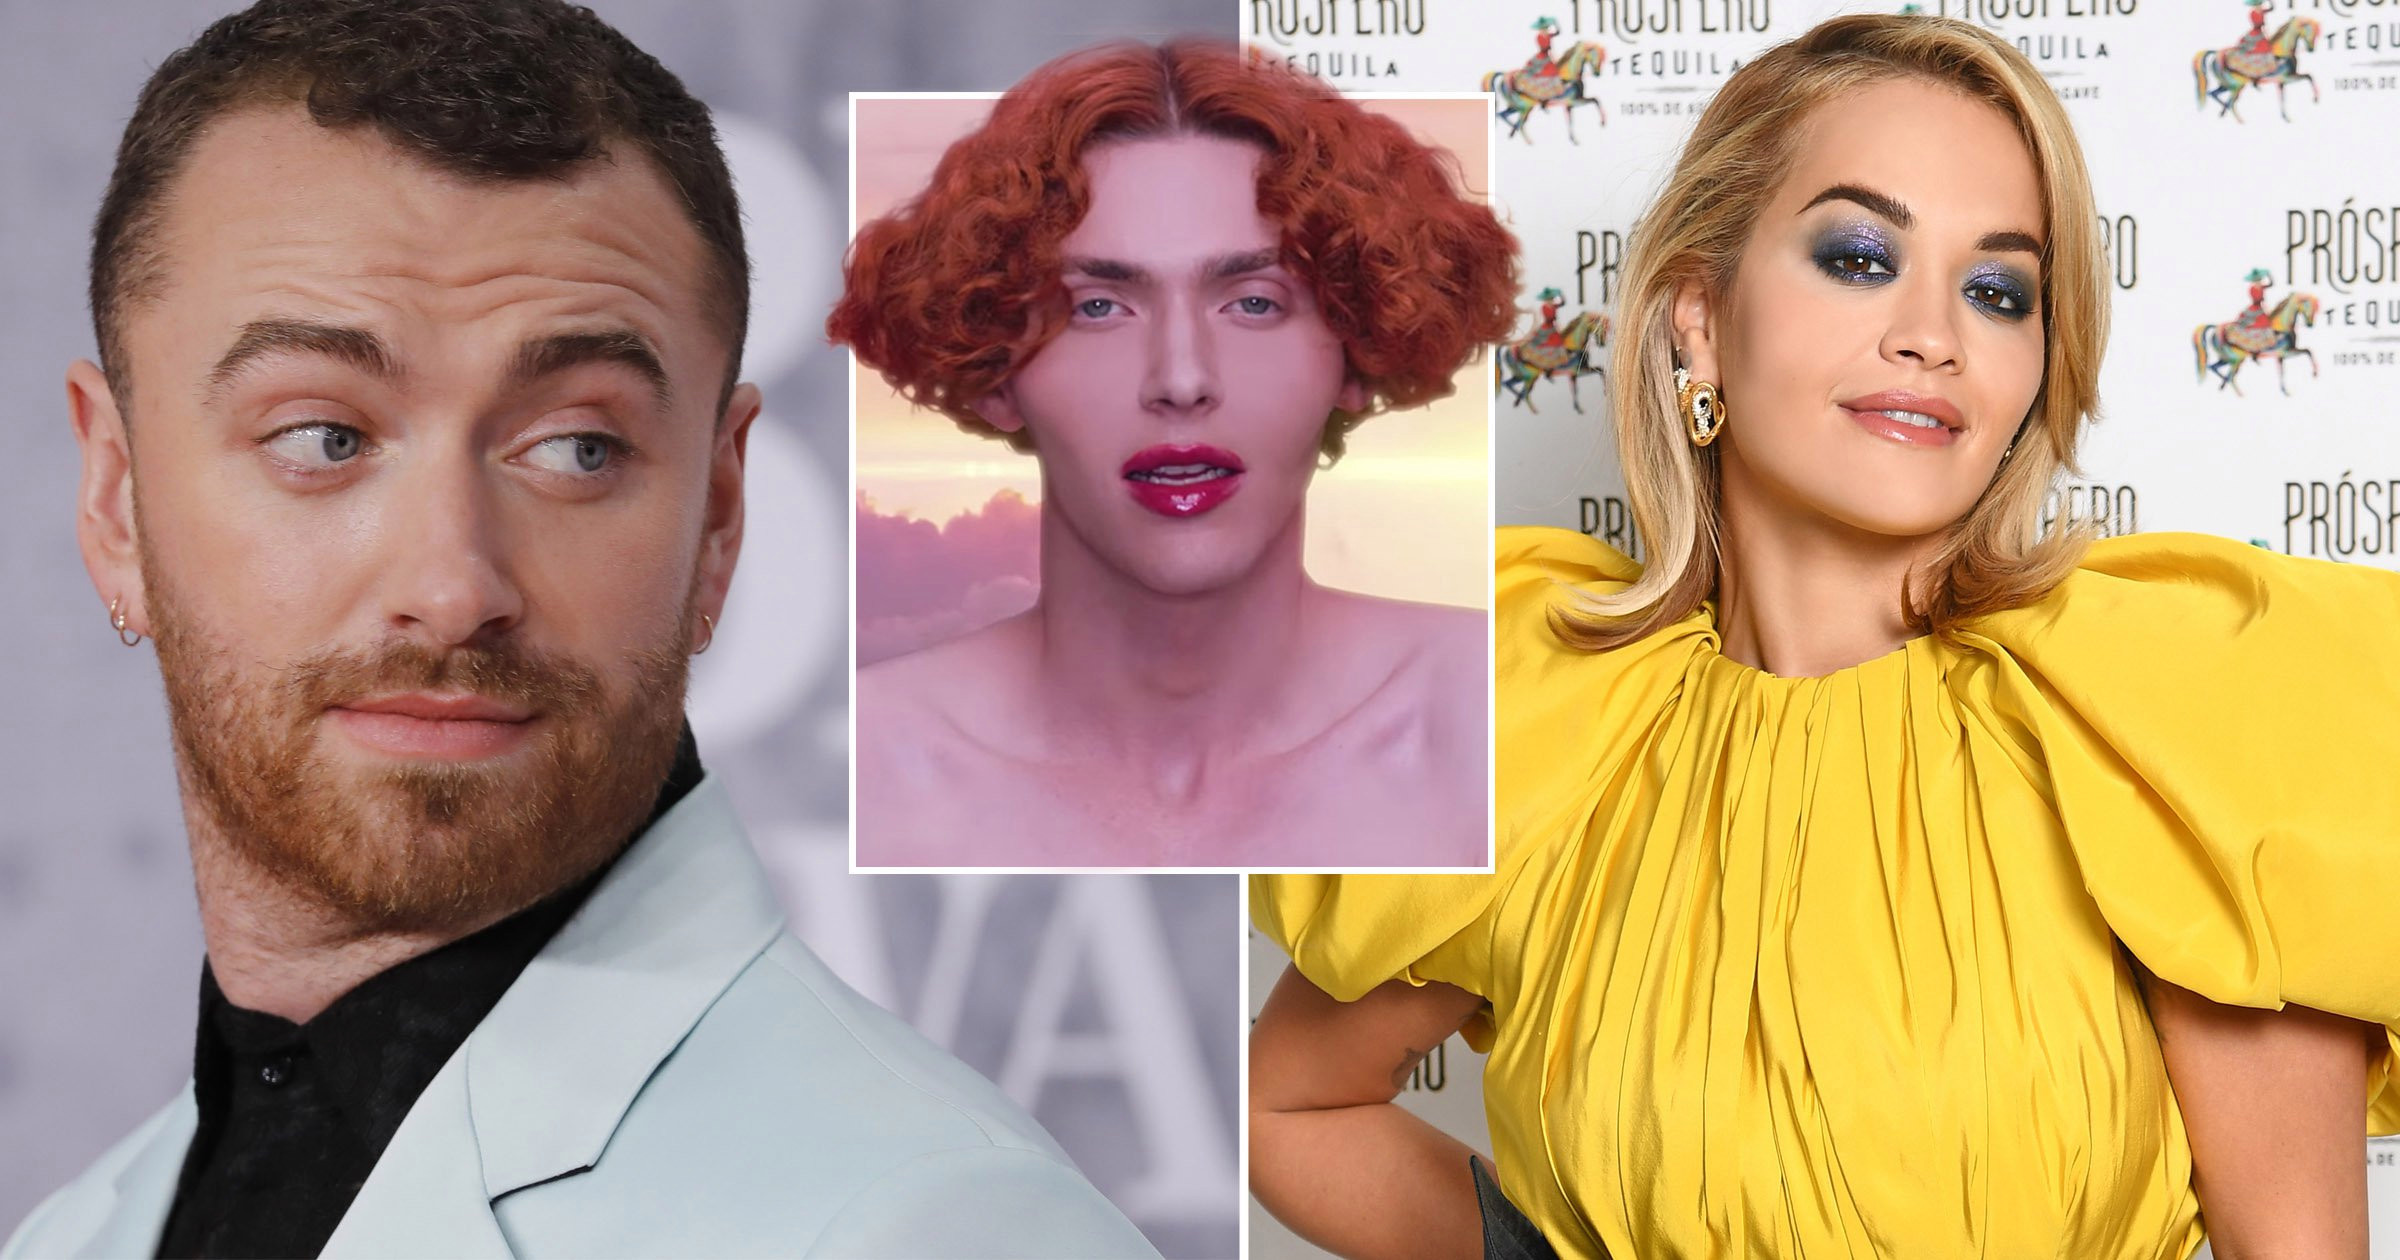 Sam Smith and Rita Ora lead tributes to SOPHIE as iconic musician dies aged 34